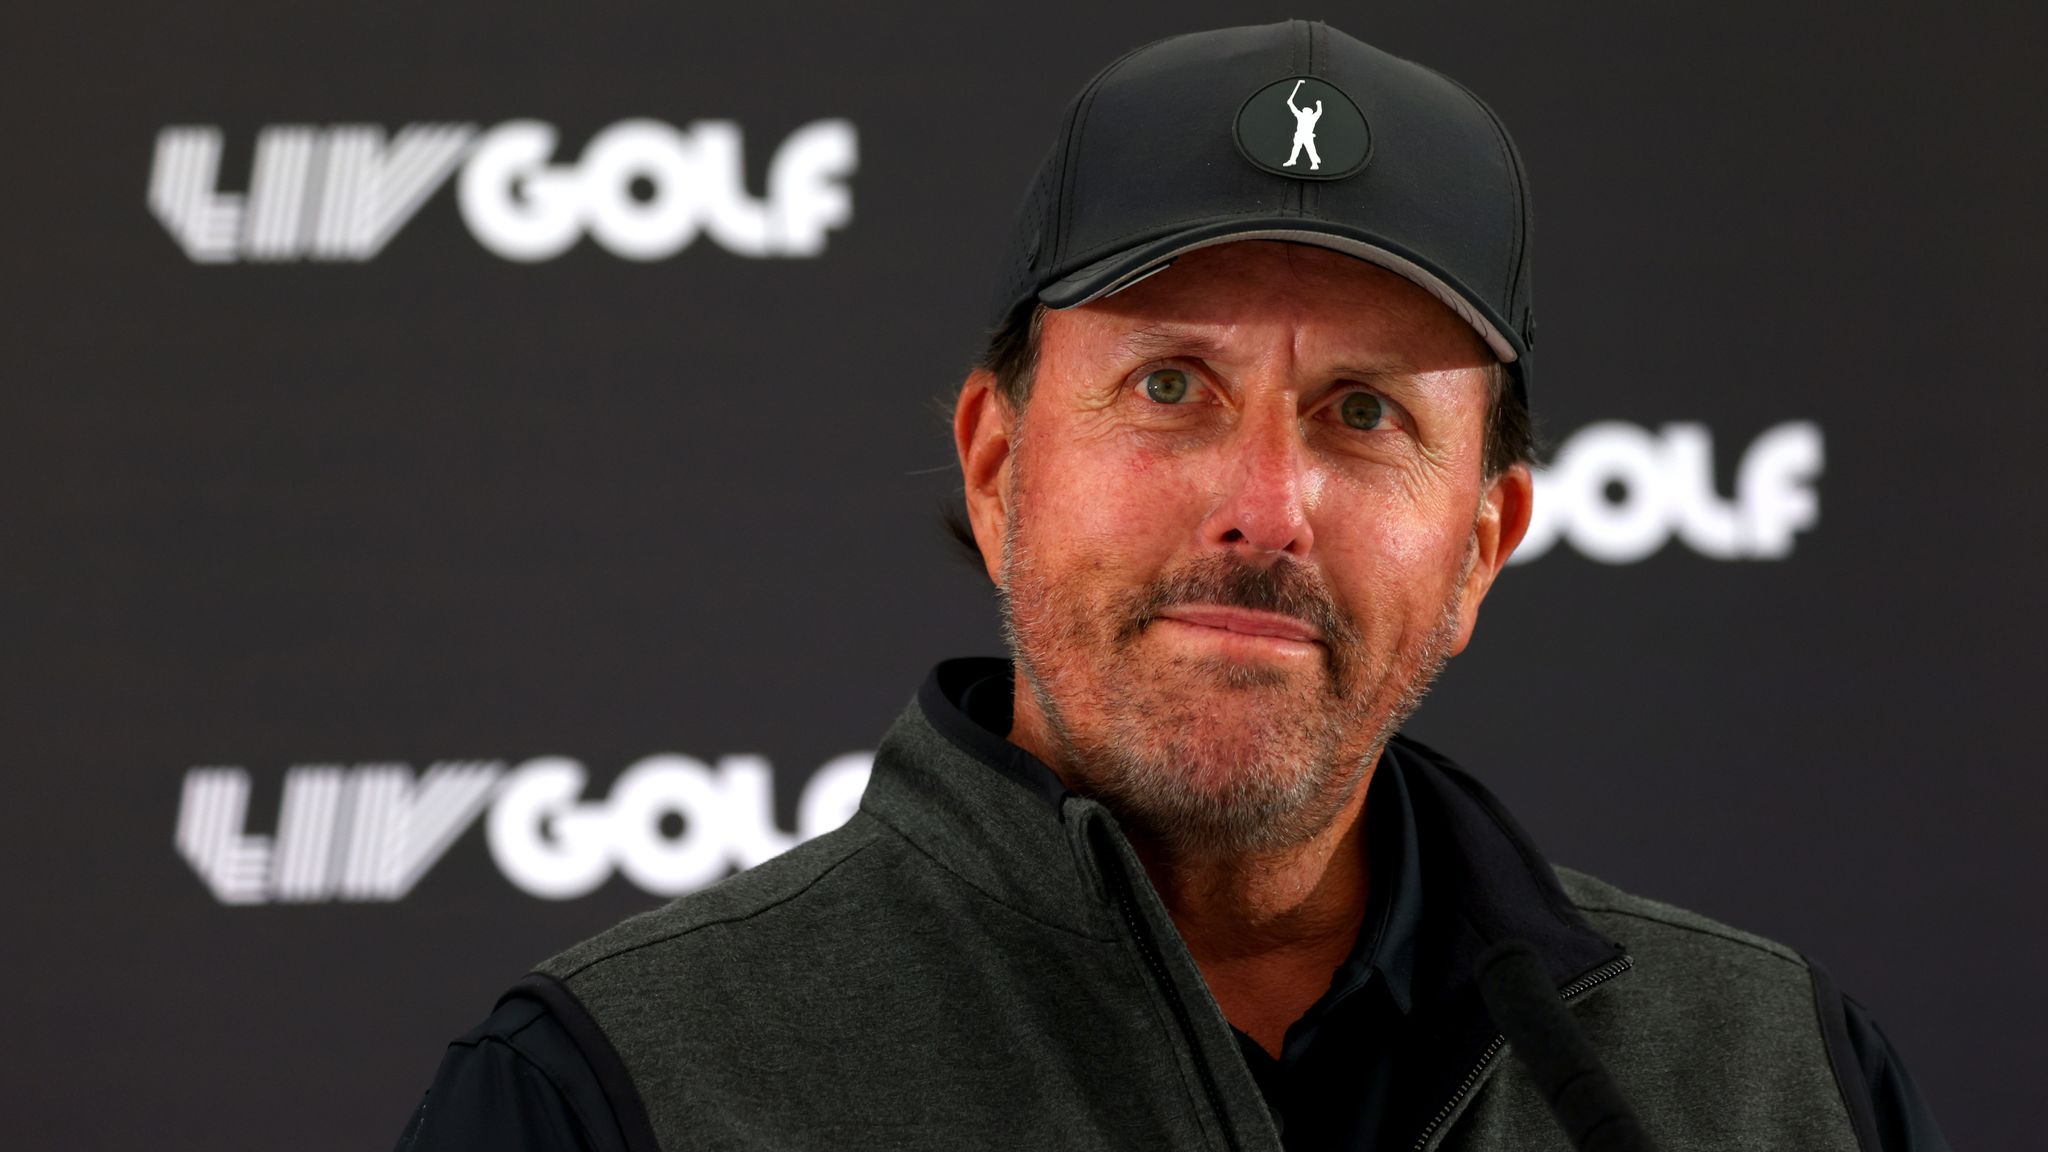 Phil Mickelson discusses winning another major, LIV-PGA Tour drama, being ‘at peace’ with exclusion